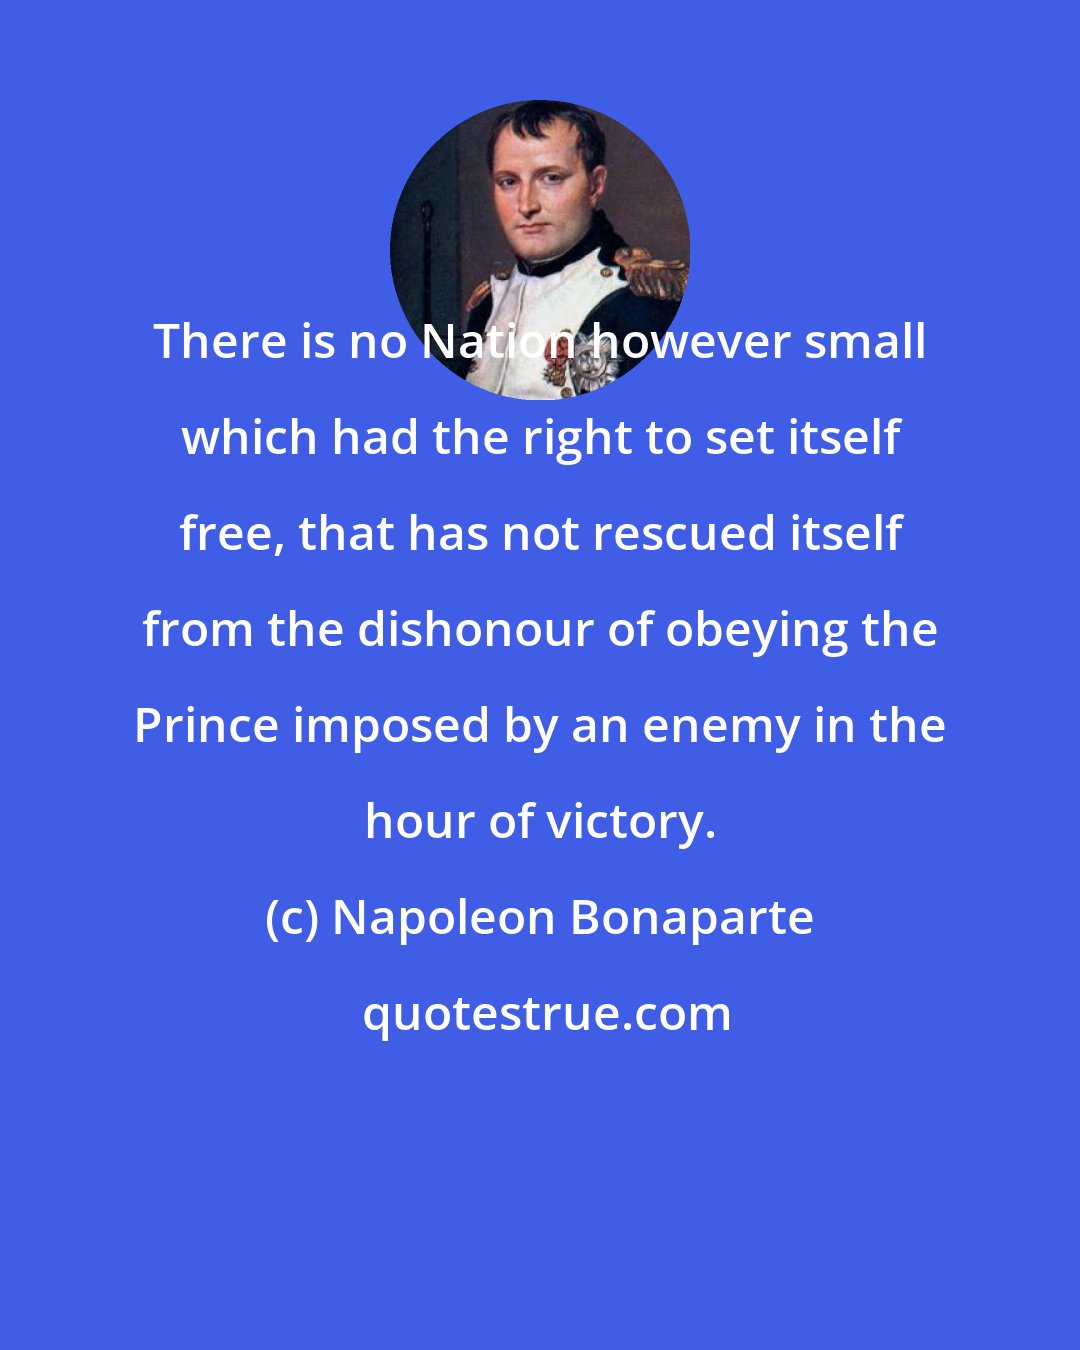 Napoleon Bonaparte: There is no Nation however small which had the right to set itself free, that has not rescued itself from the dishonour of obeying the Prince imposed by an enemy in the hour of victory.